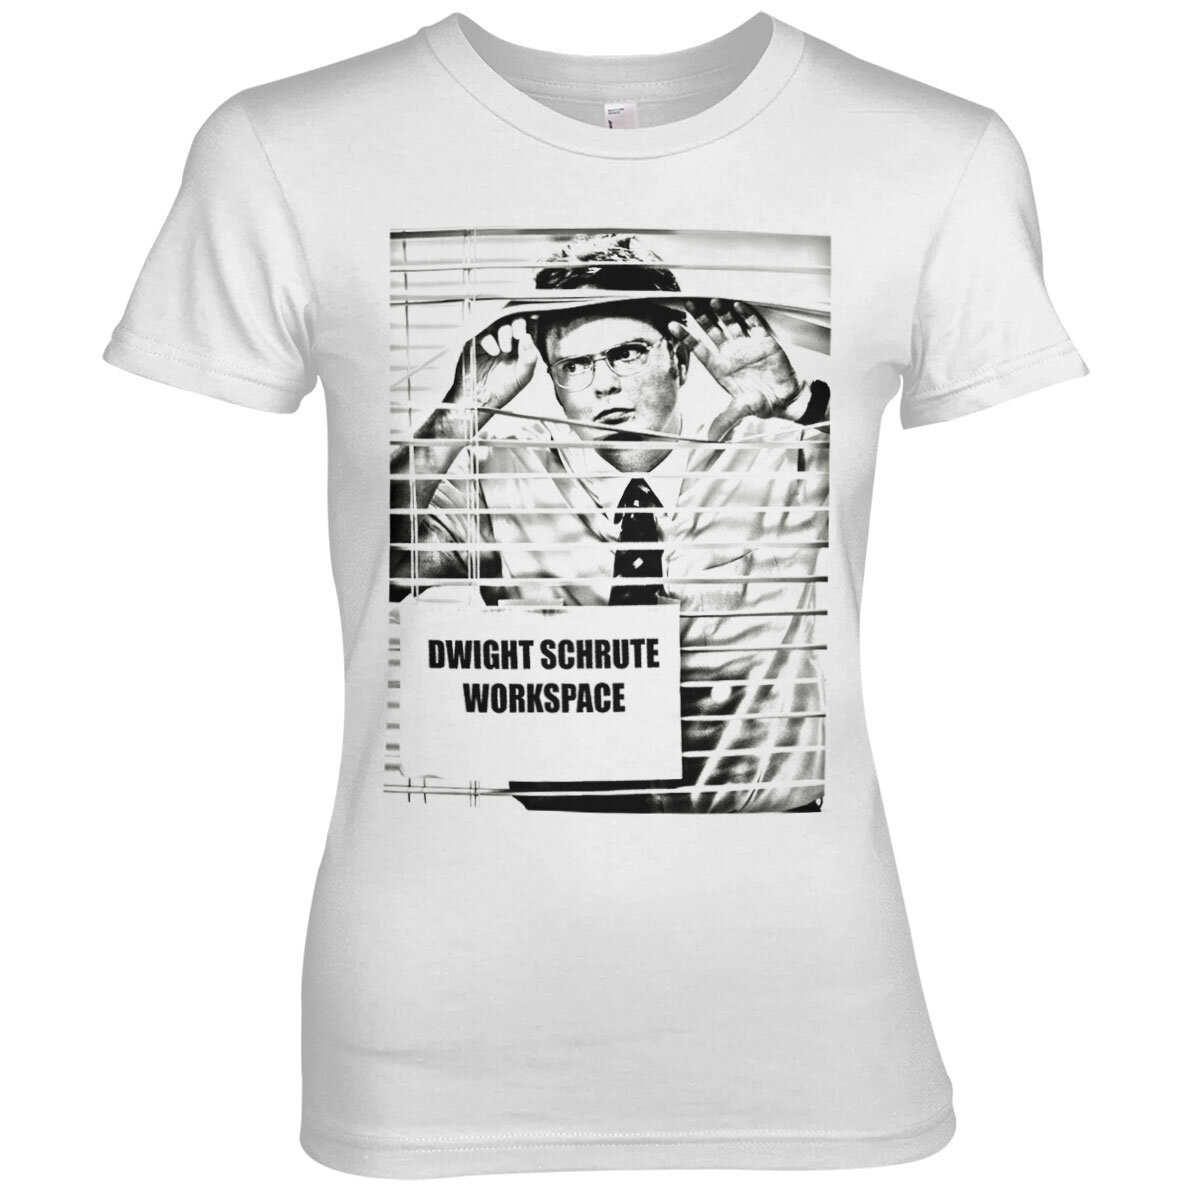 Dwight Schrute Workspace Girly Tee